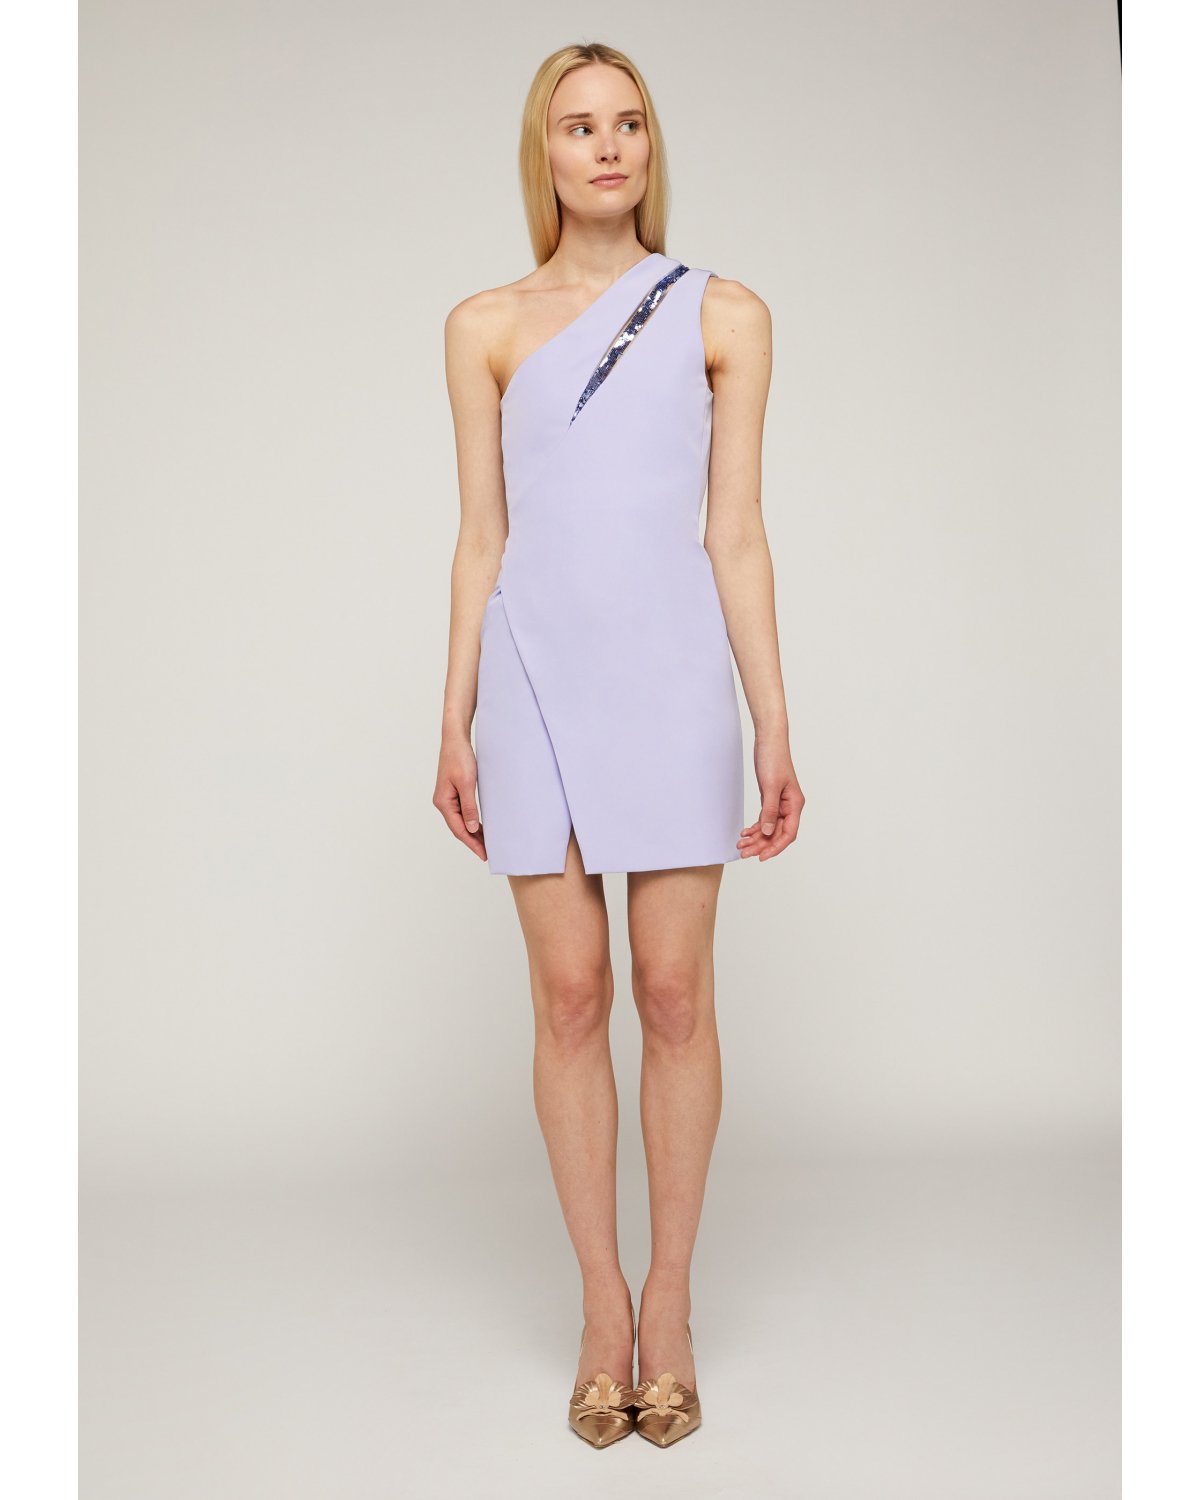 One-shoulder cocktail minidress | Spring Summer 2023 Collection, 73_74, Cruise 2023 Collection, Warm weather wear, Ready to Wear, Spring days, Sale, Summer Sale, Mid season sale -40% | Genny